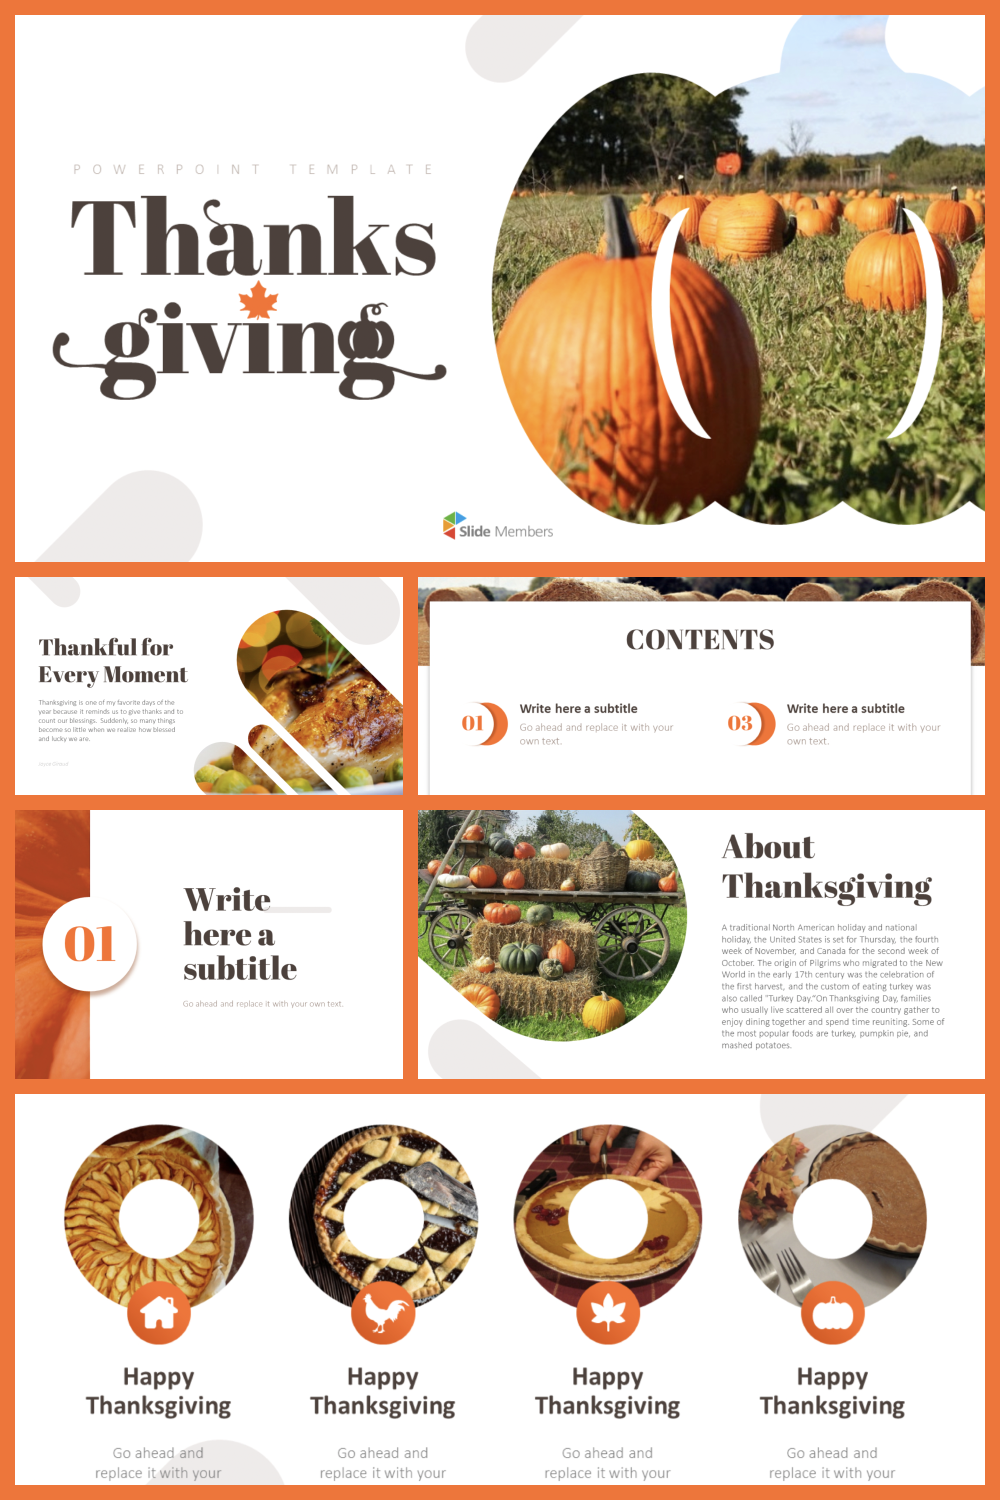 Collage of screenshots of presentation pages with photos of pumpkins and pies.